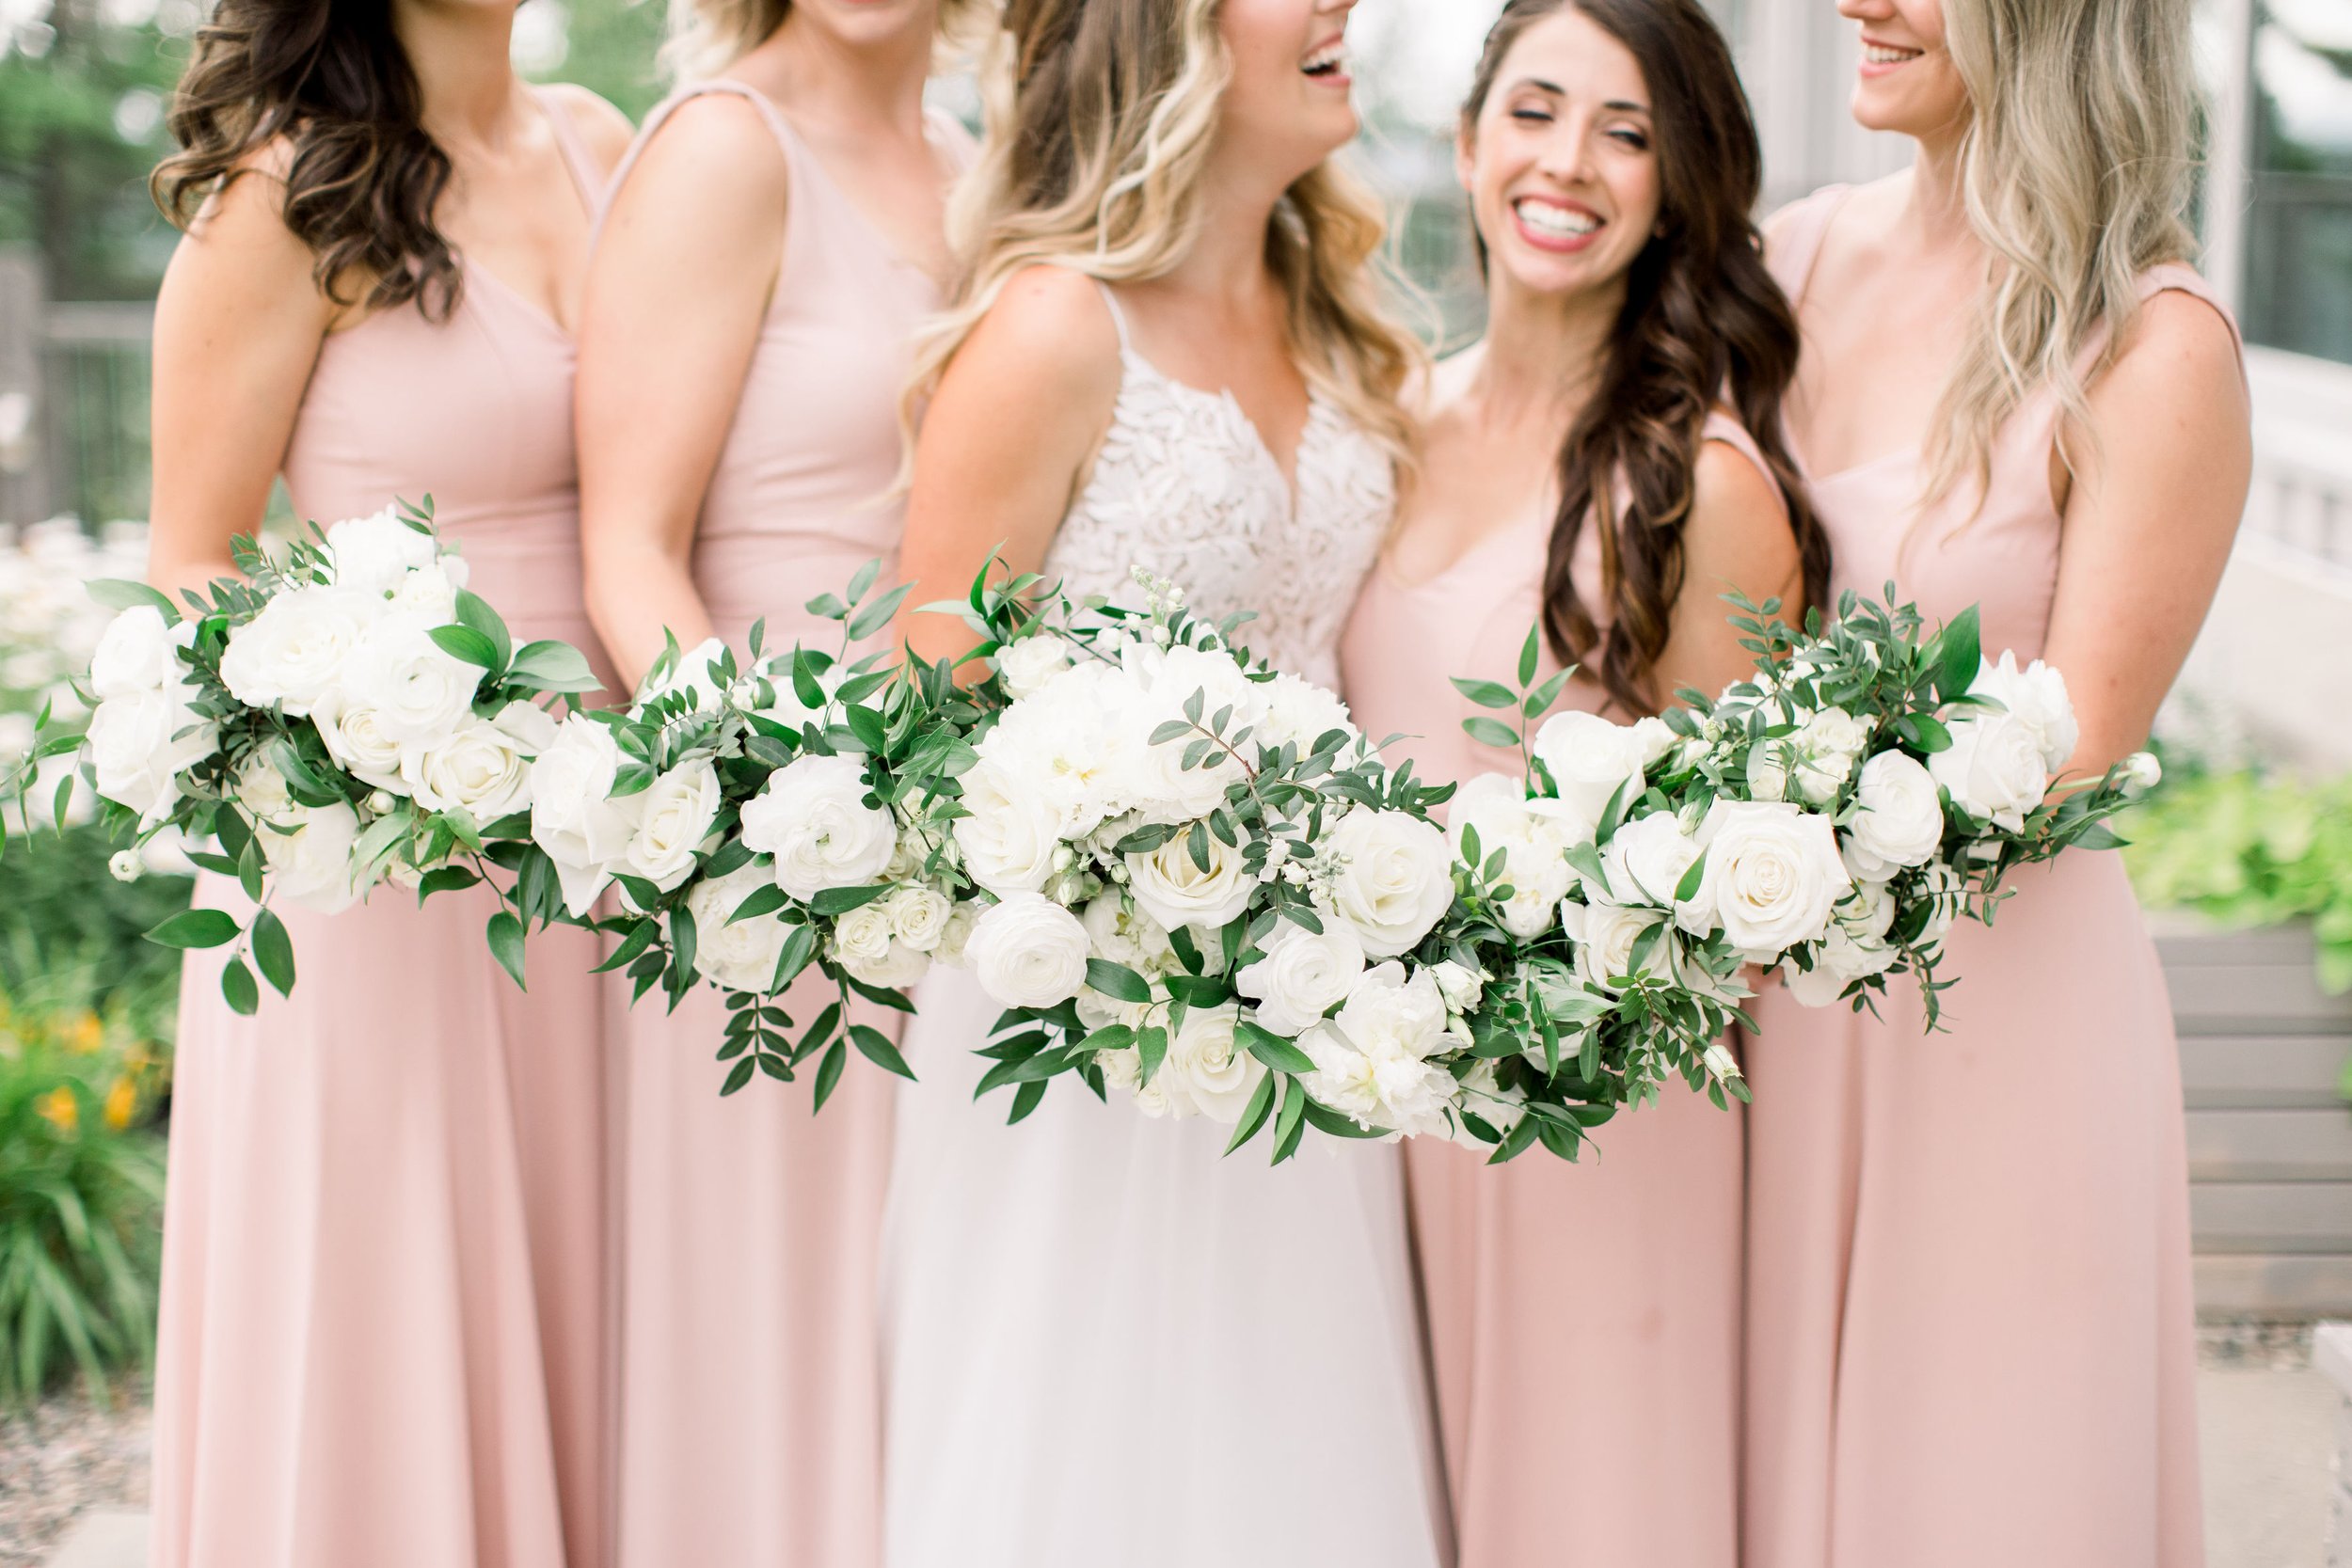  The bride laughs with her bridesmaids all wearing light pink by Chelsea Mason Photography. light pink dresses summer wedding bridesmaid #Quebecweddings #elegantoutdoorwedding #Quebecweddingphotographers #Chelseamasonphotography #Chelseamasonweddings